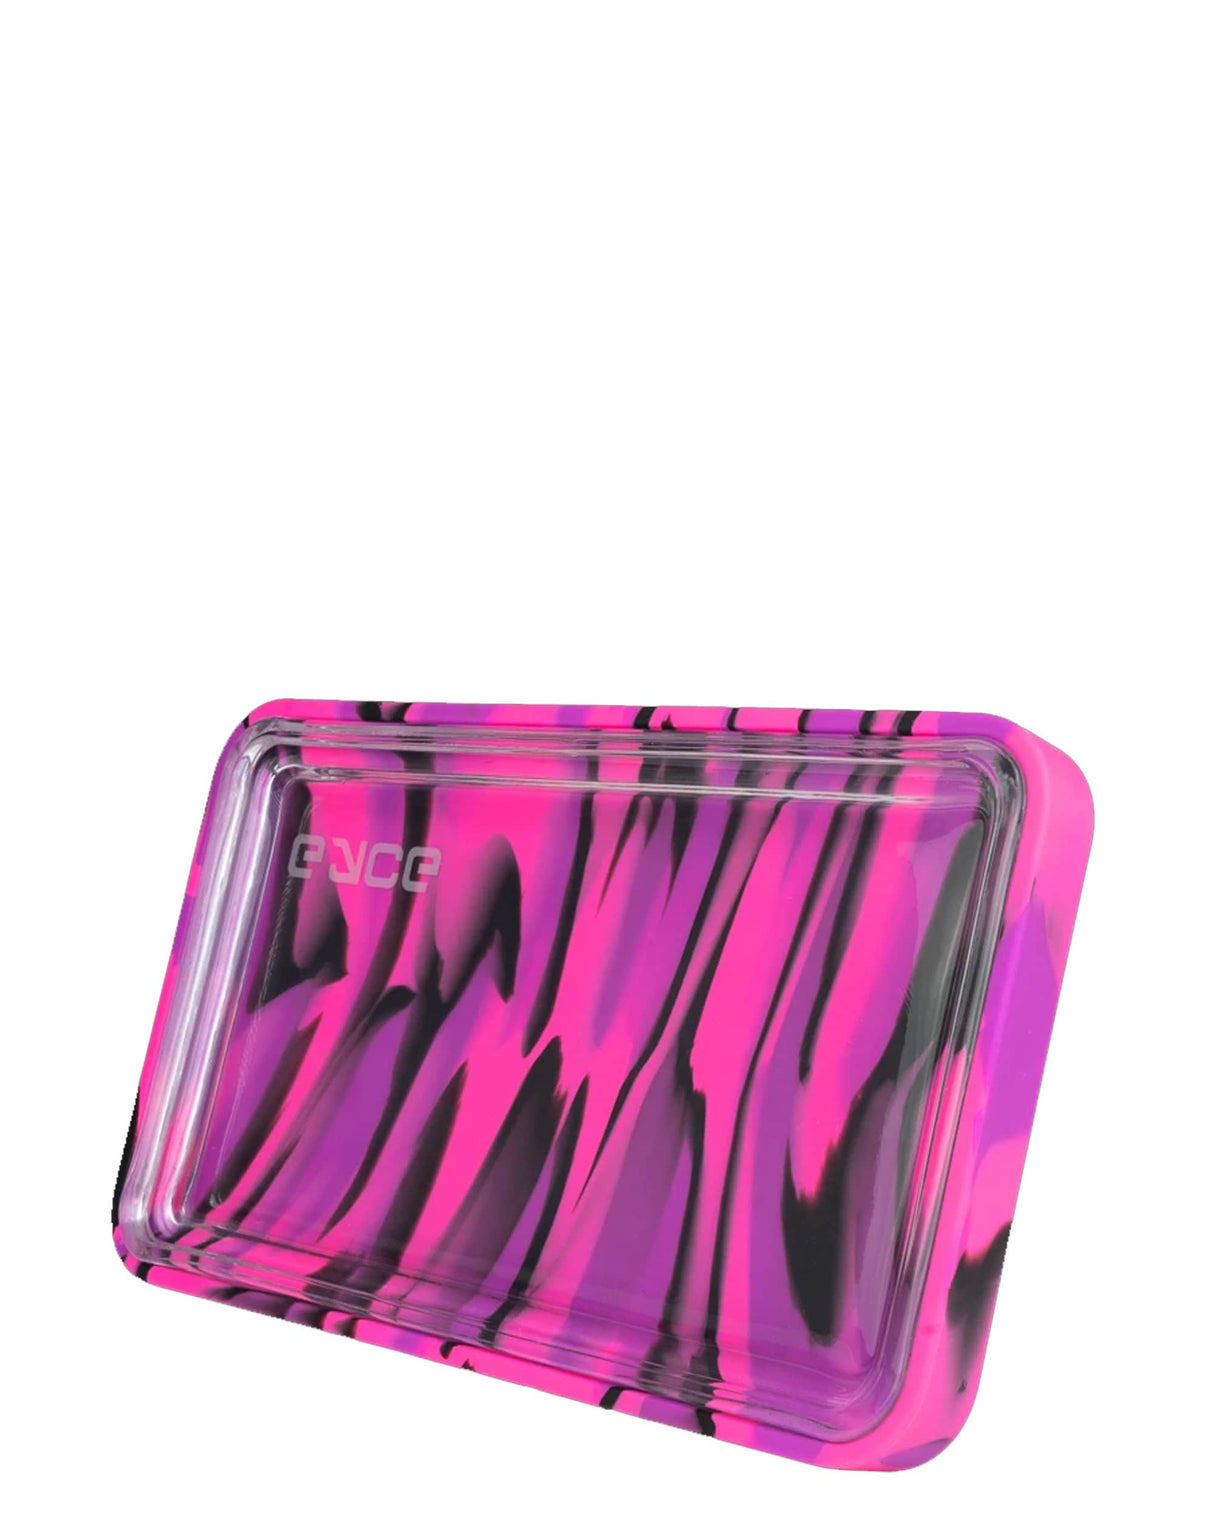 Eyce 2 in 1 Silicone Rolling Tray in Purple, Durable and Flexible, Front View